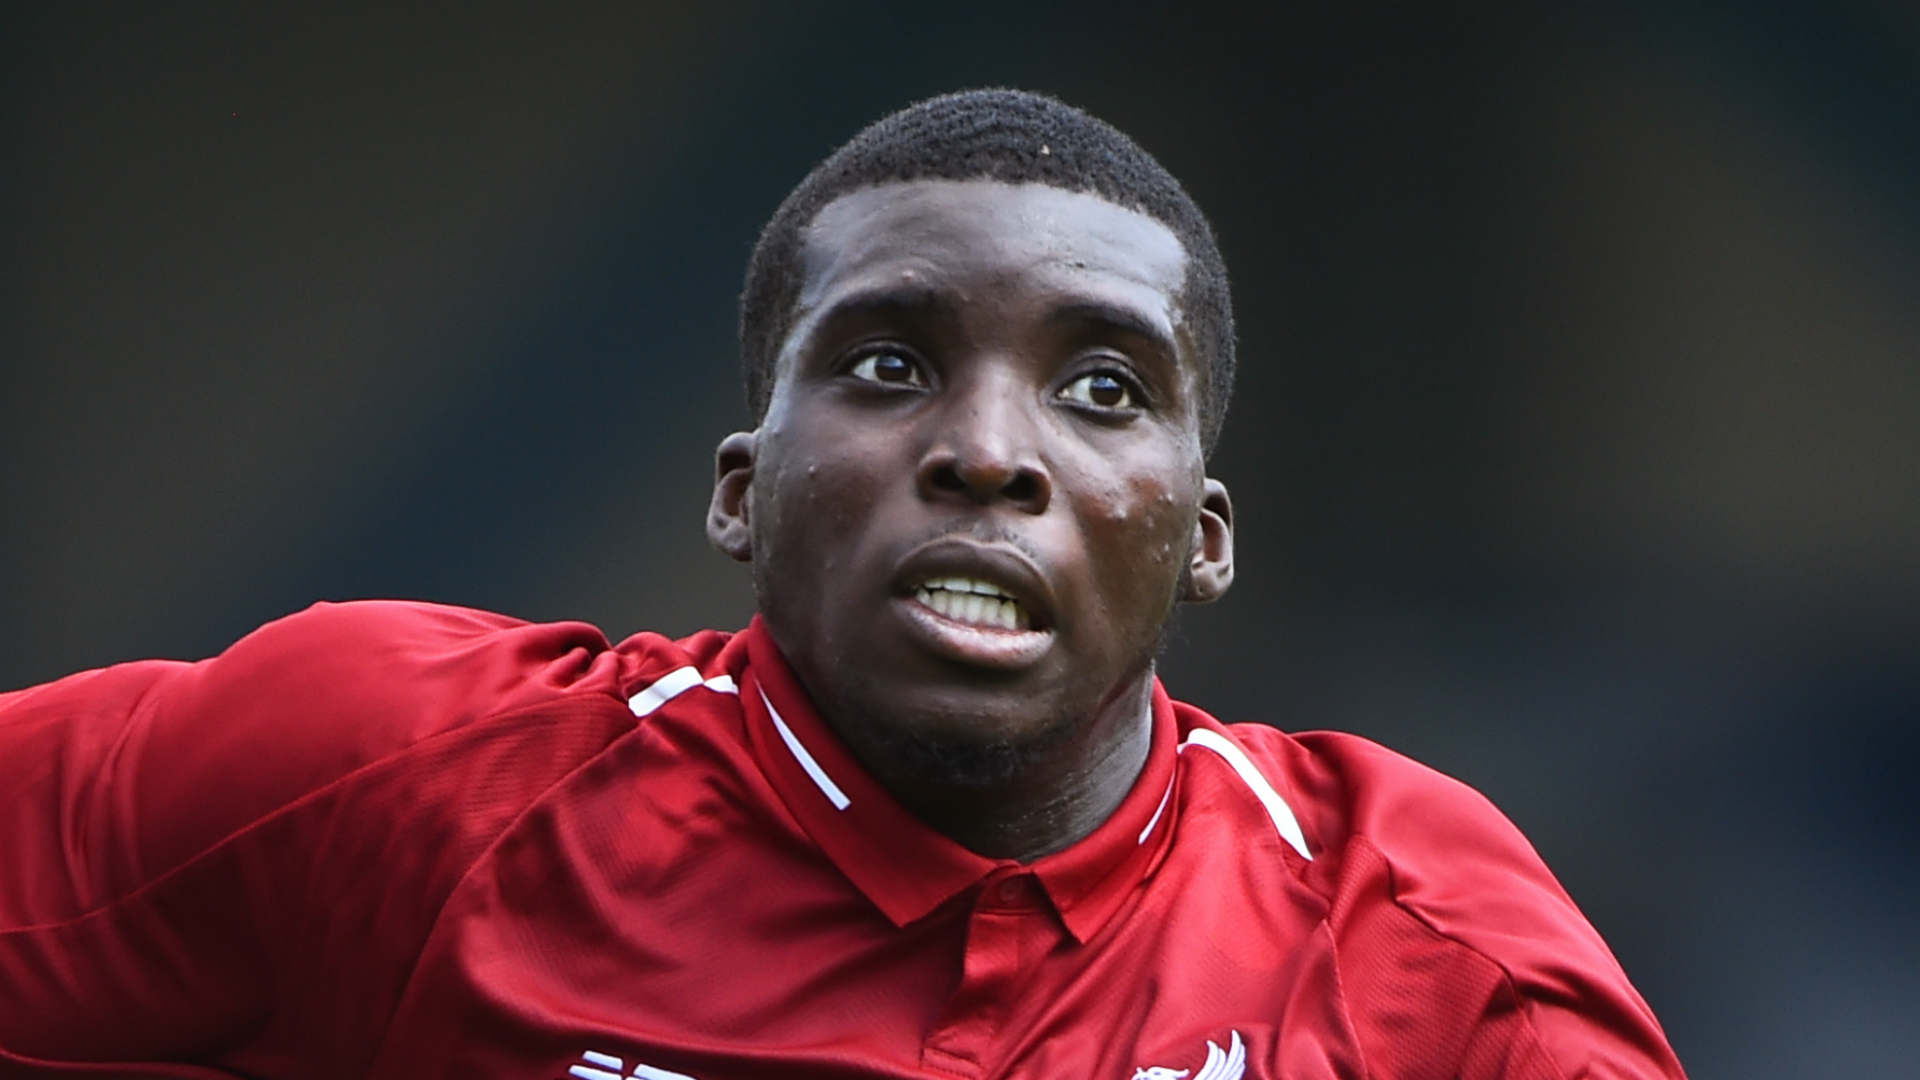 After a loan spell with Reims last season, Sheyi Ojo will team up with Liverpool legend Steven Gerrard at Rangers for the 2019-20 campaign.